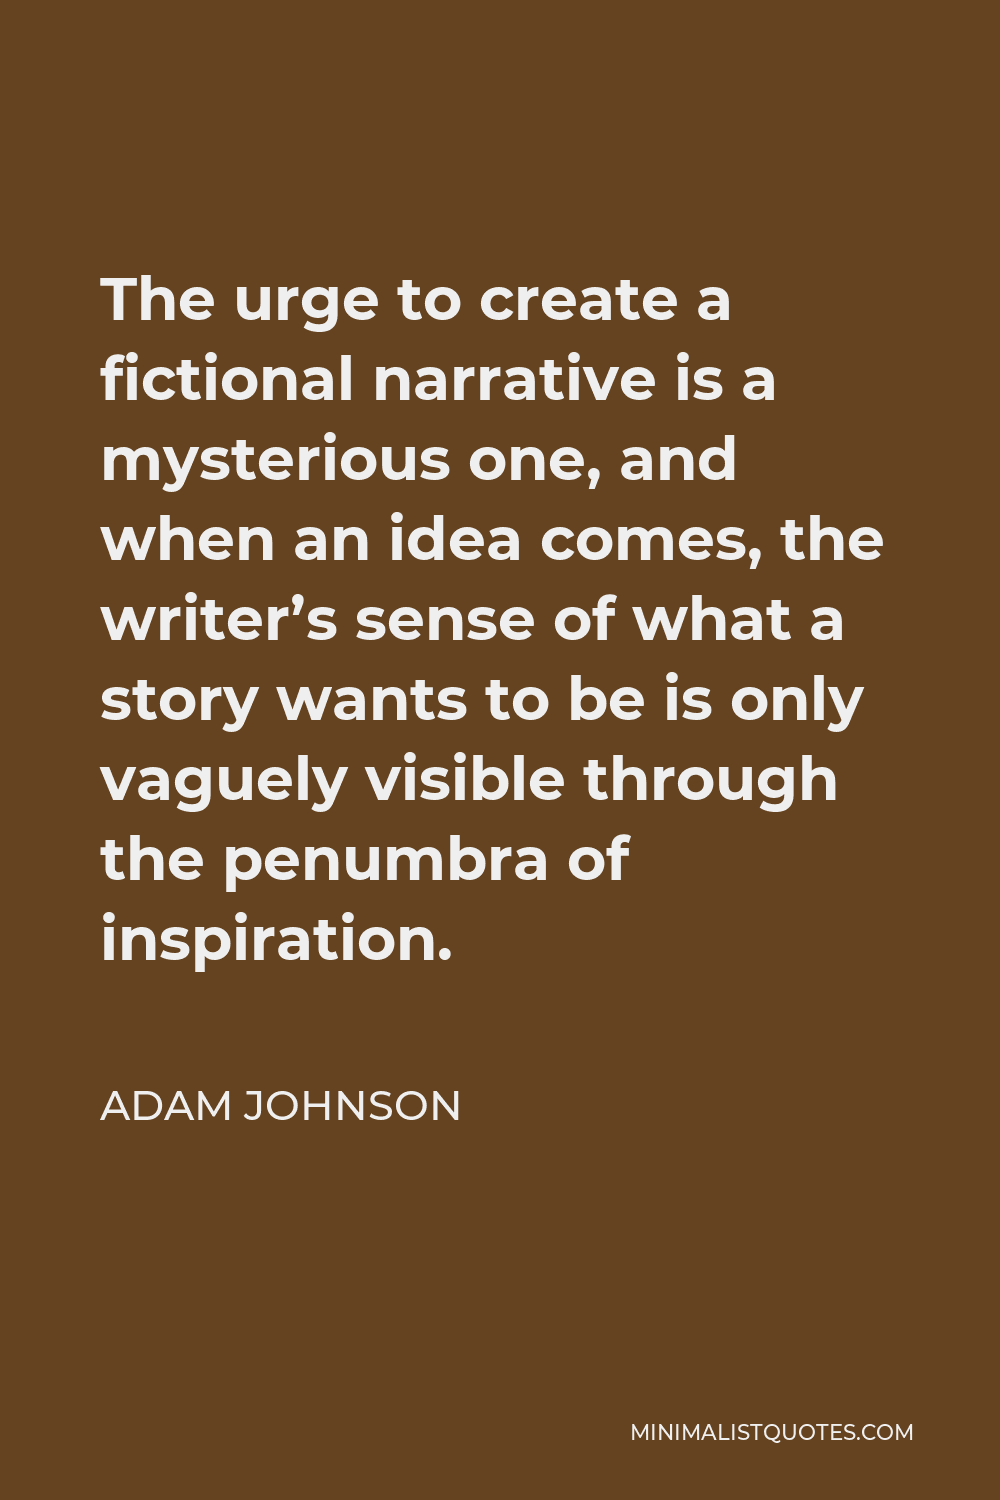 Adam Johnson Quote - The urge to create a fictional narrative is a mysterious one, and when an idea comes, the writer’s sense of what a story wants to be is only vaguely visible through the penumbra of inspiration.